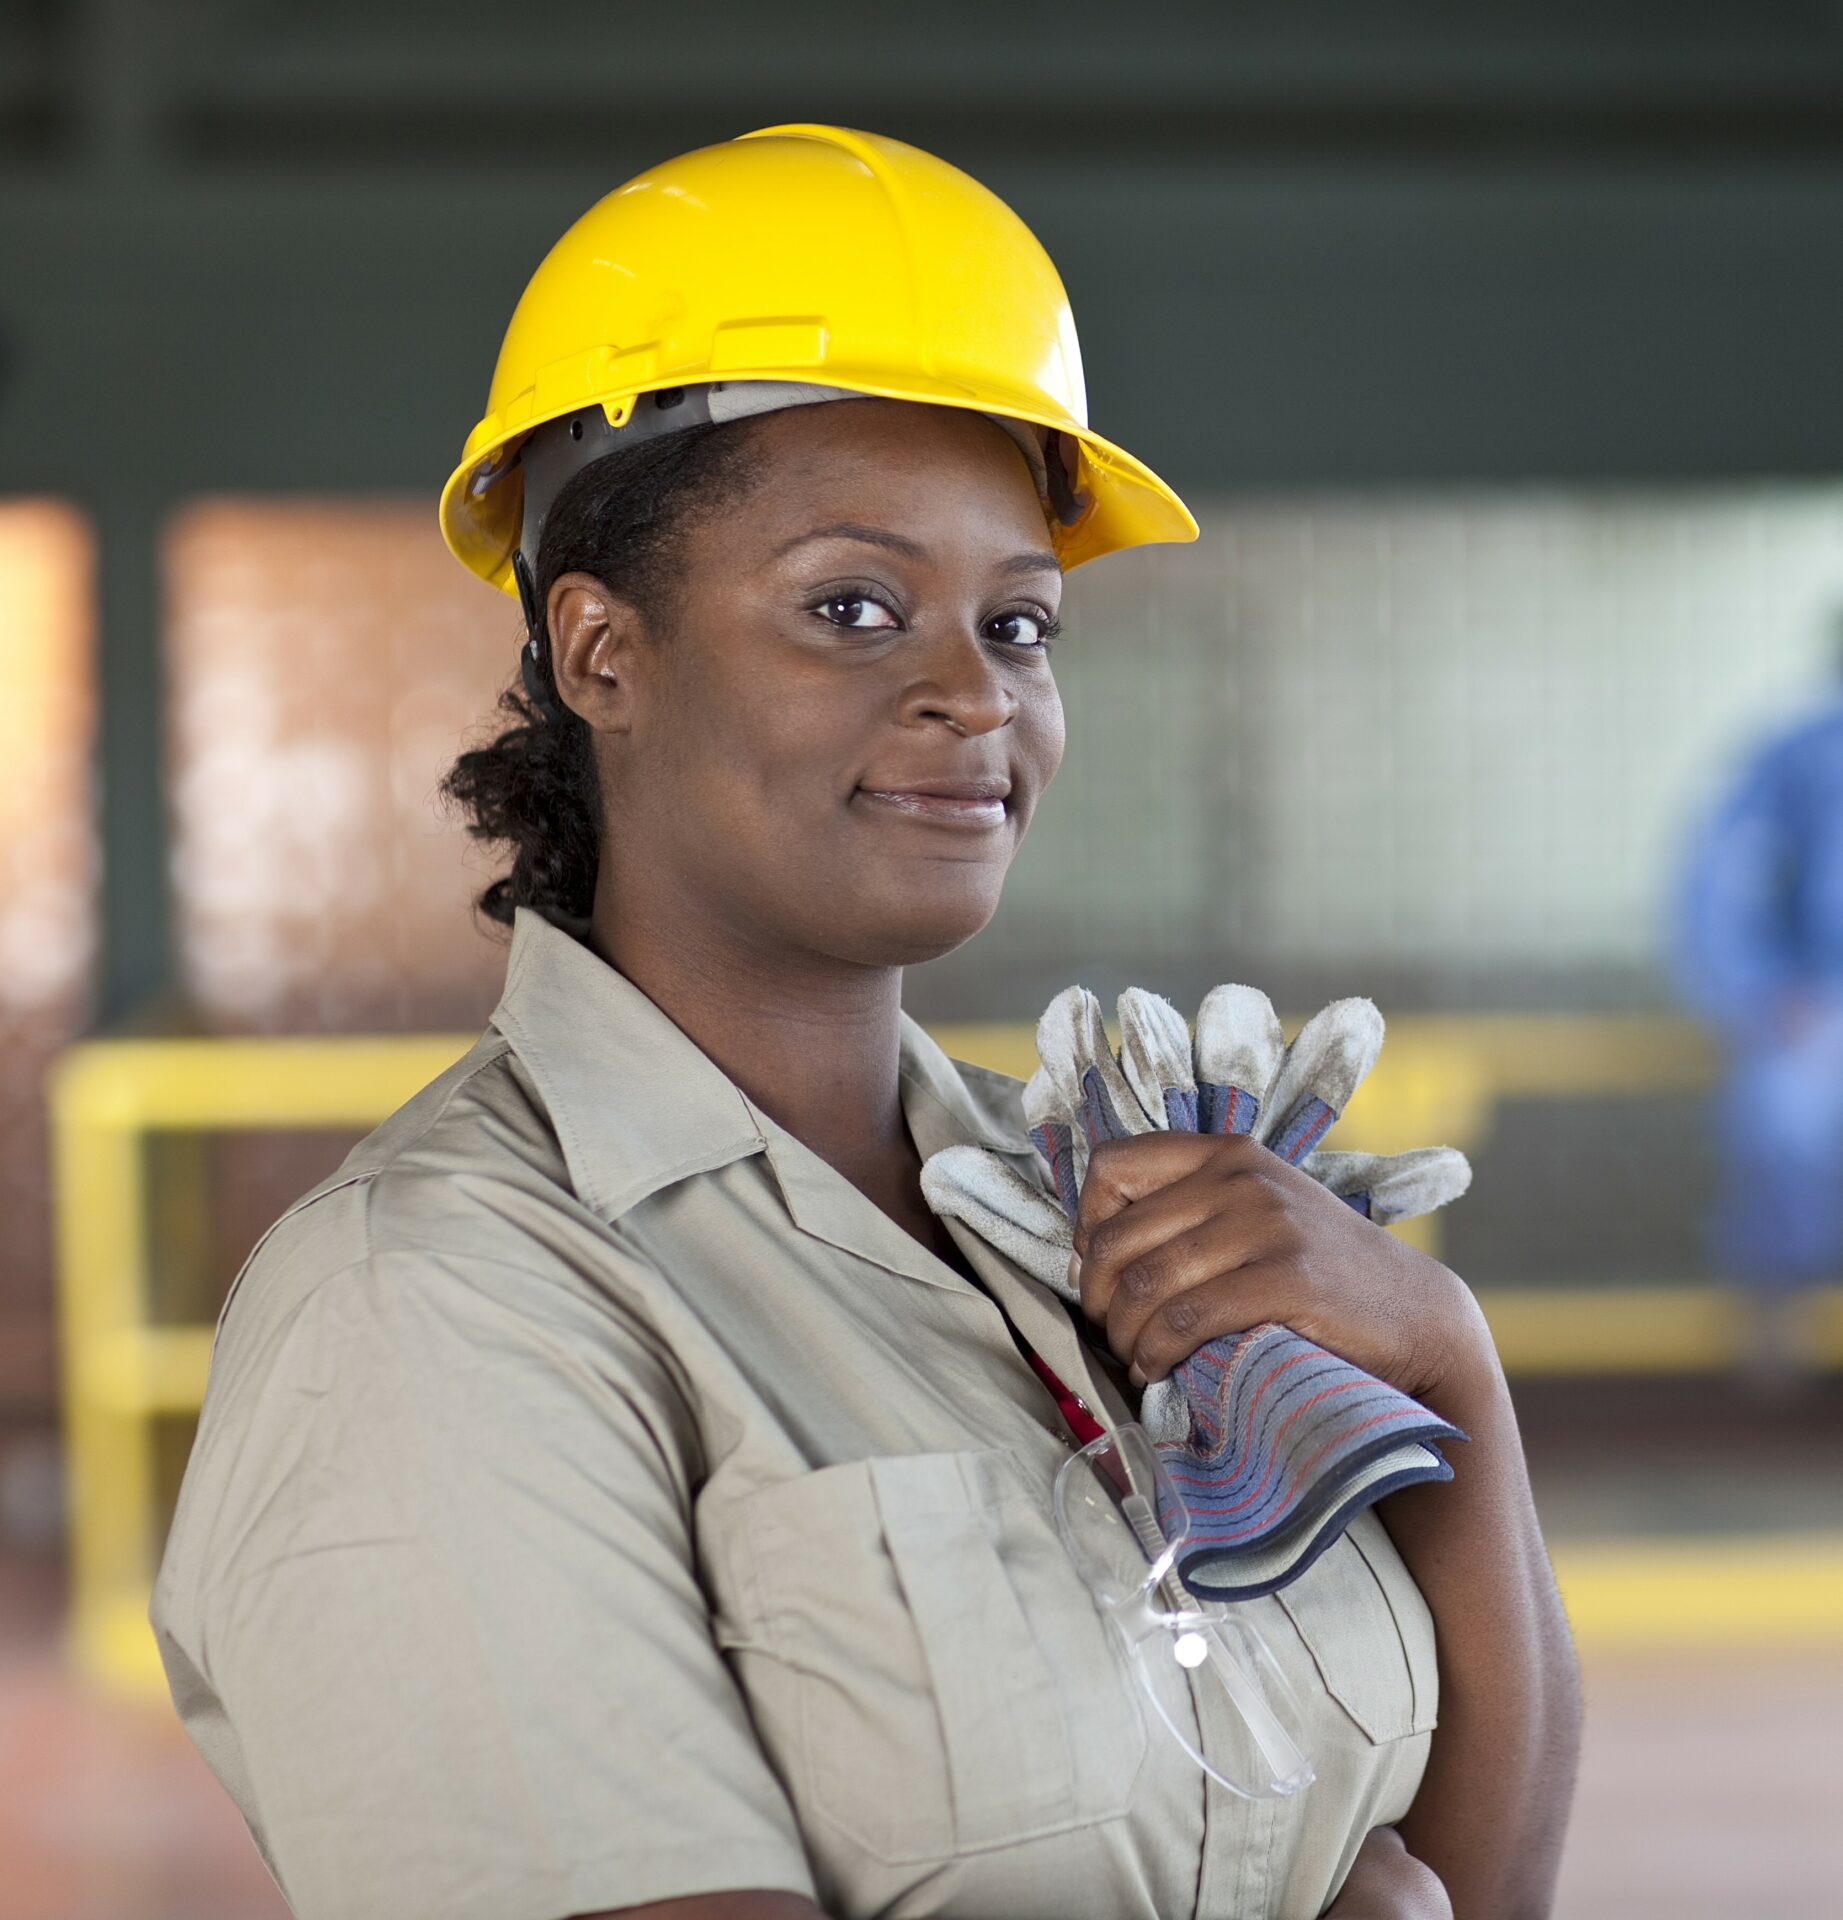 woman of color construction worker with yellow helmet